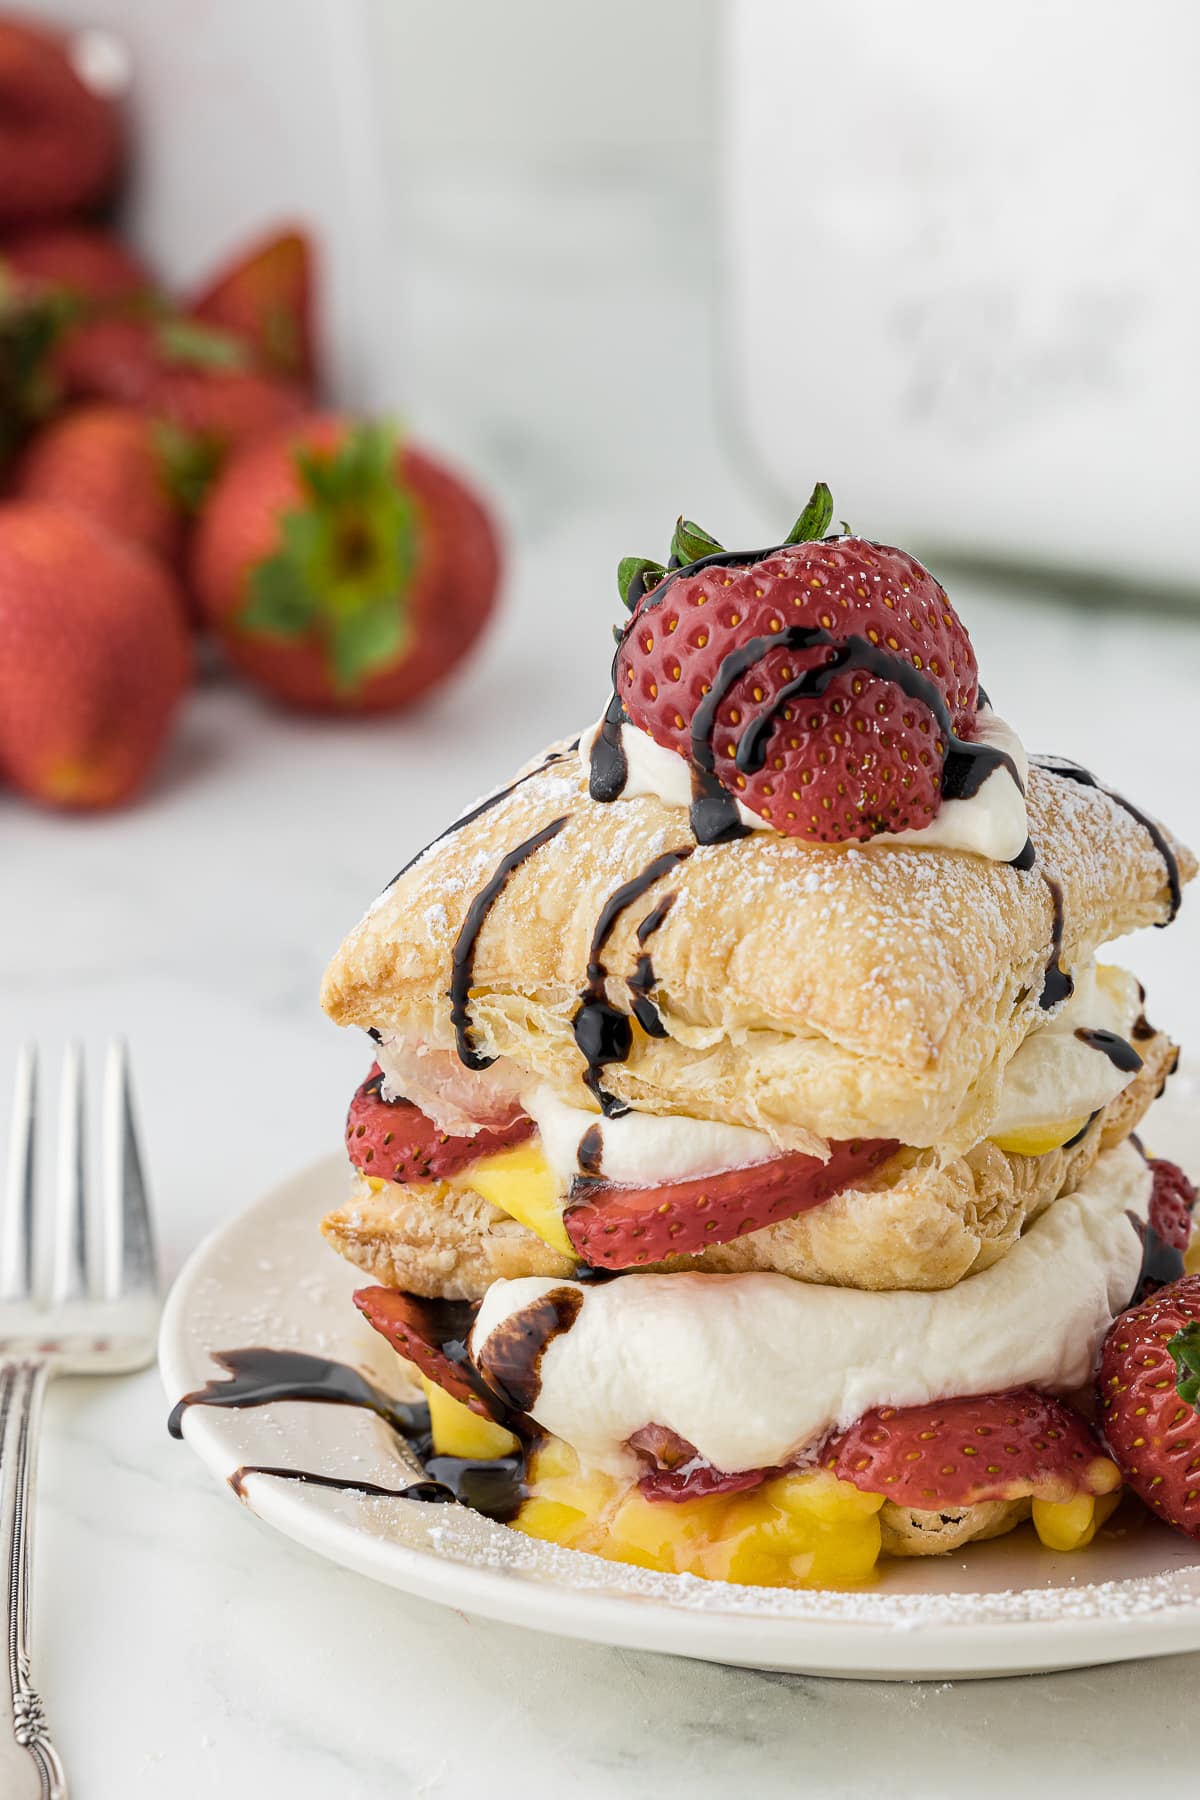 A single serving of homemade strawberry napoleon dessert with powdered sugar and drizzled chocolate